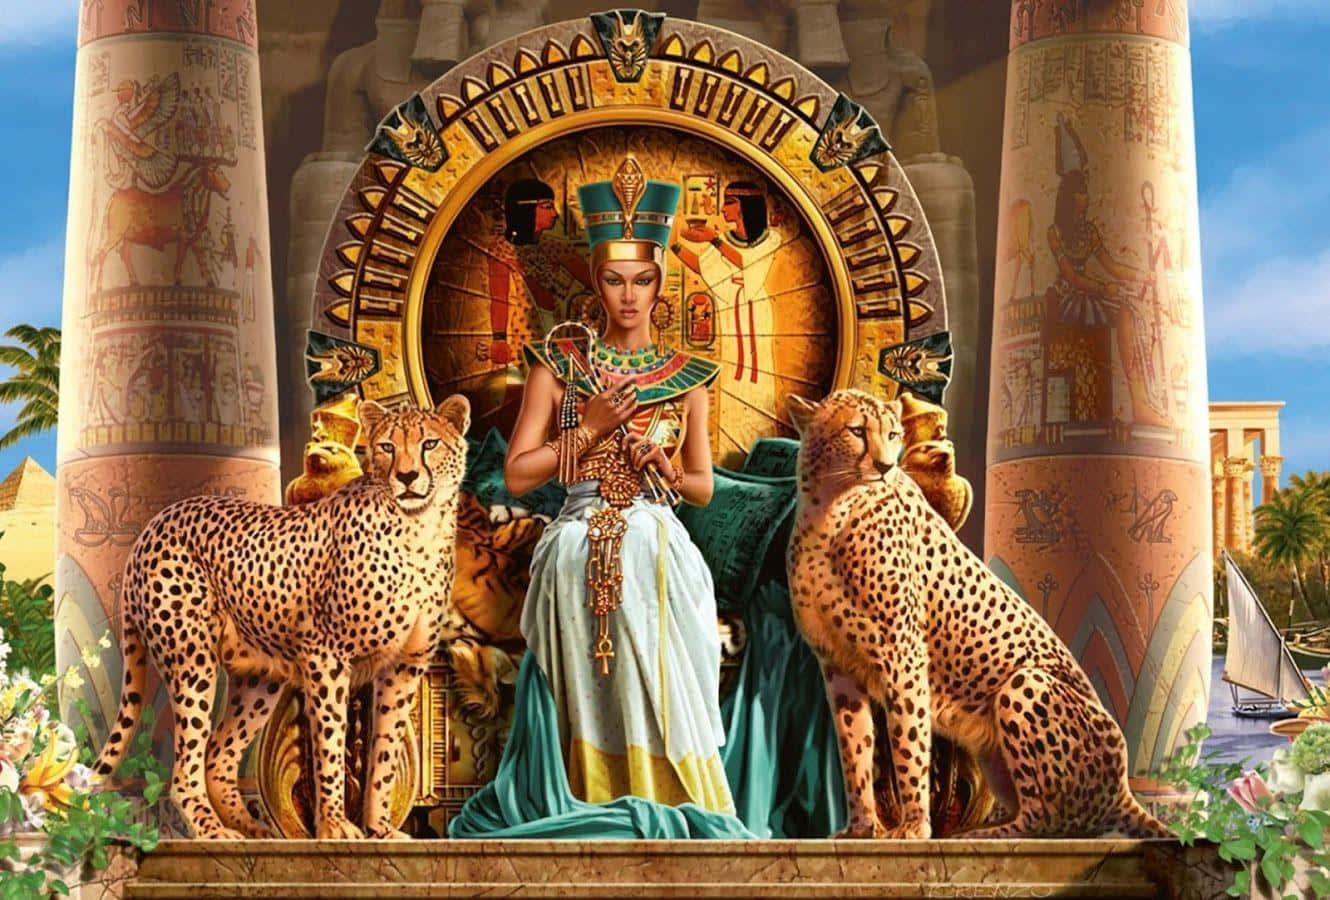 A Woman Is Sitting On A Throne With A Cheetah